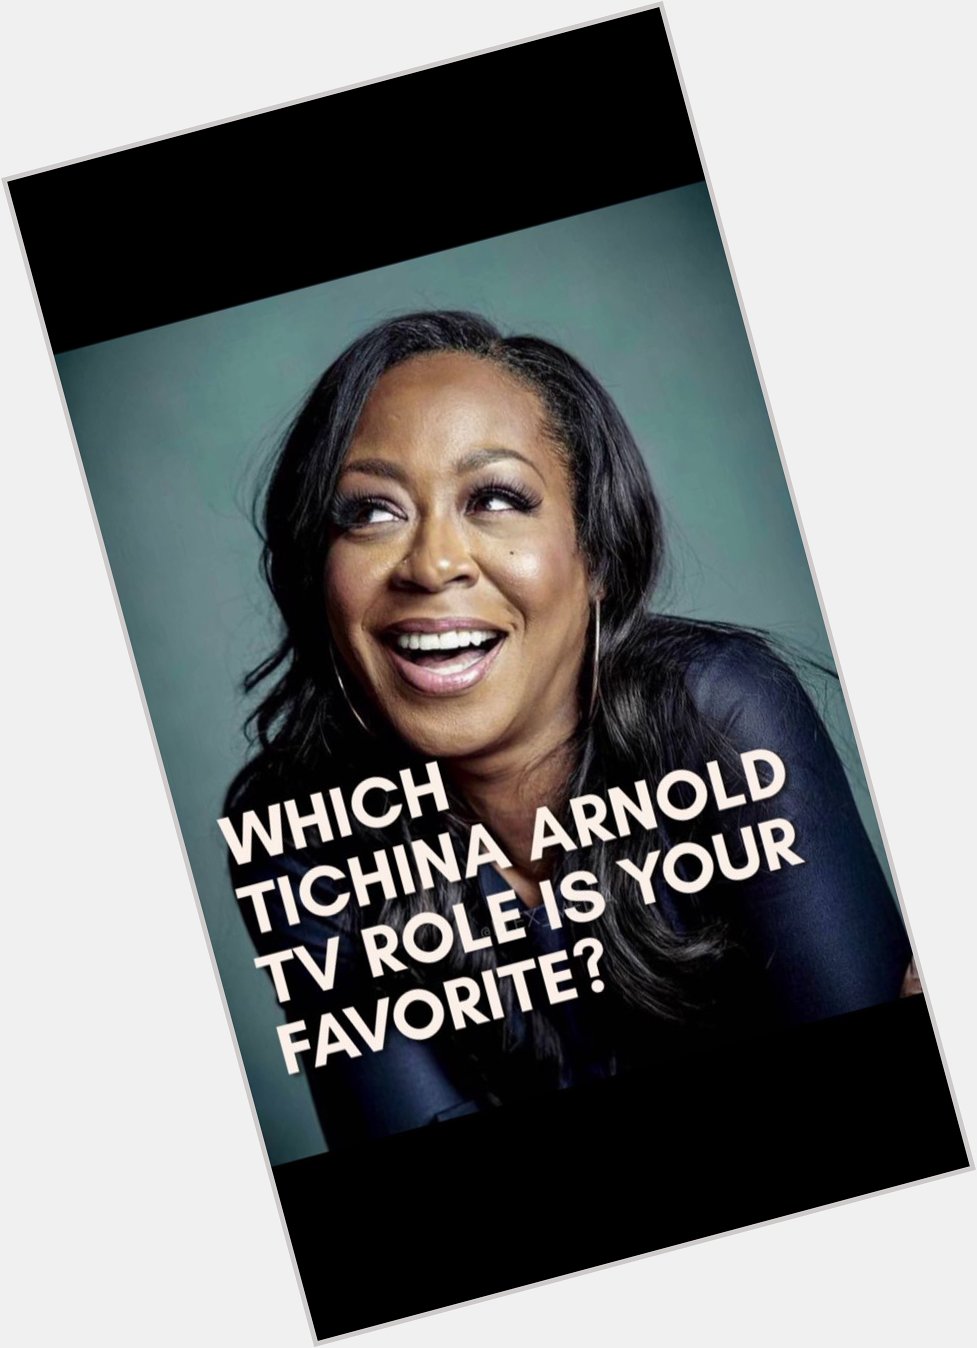 Happy Birthday to the beautiful, funny and talented Tichina Arnold! What\s your favorite TV role of hers? 